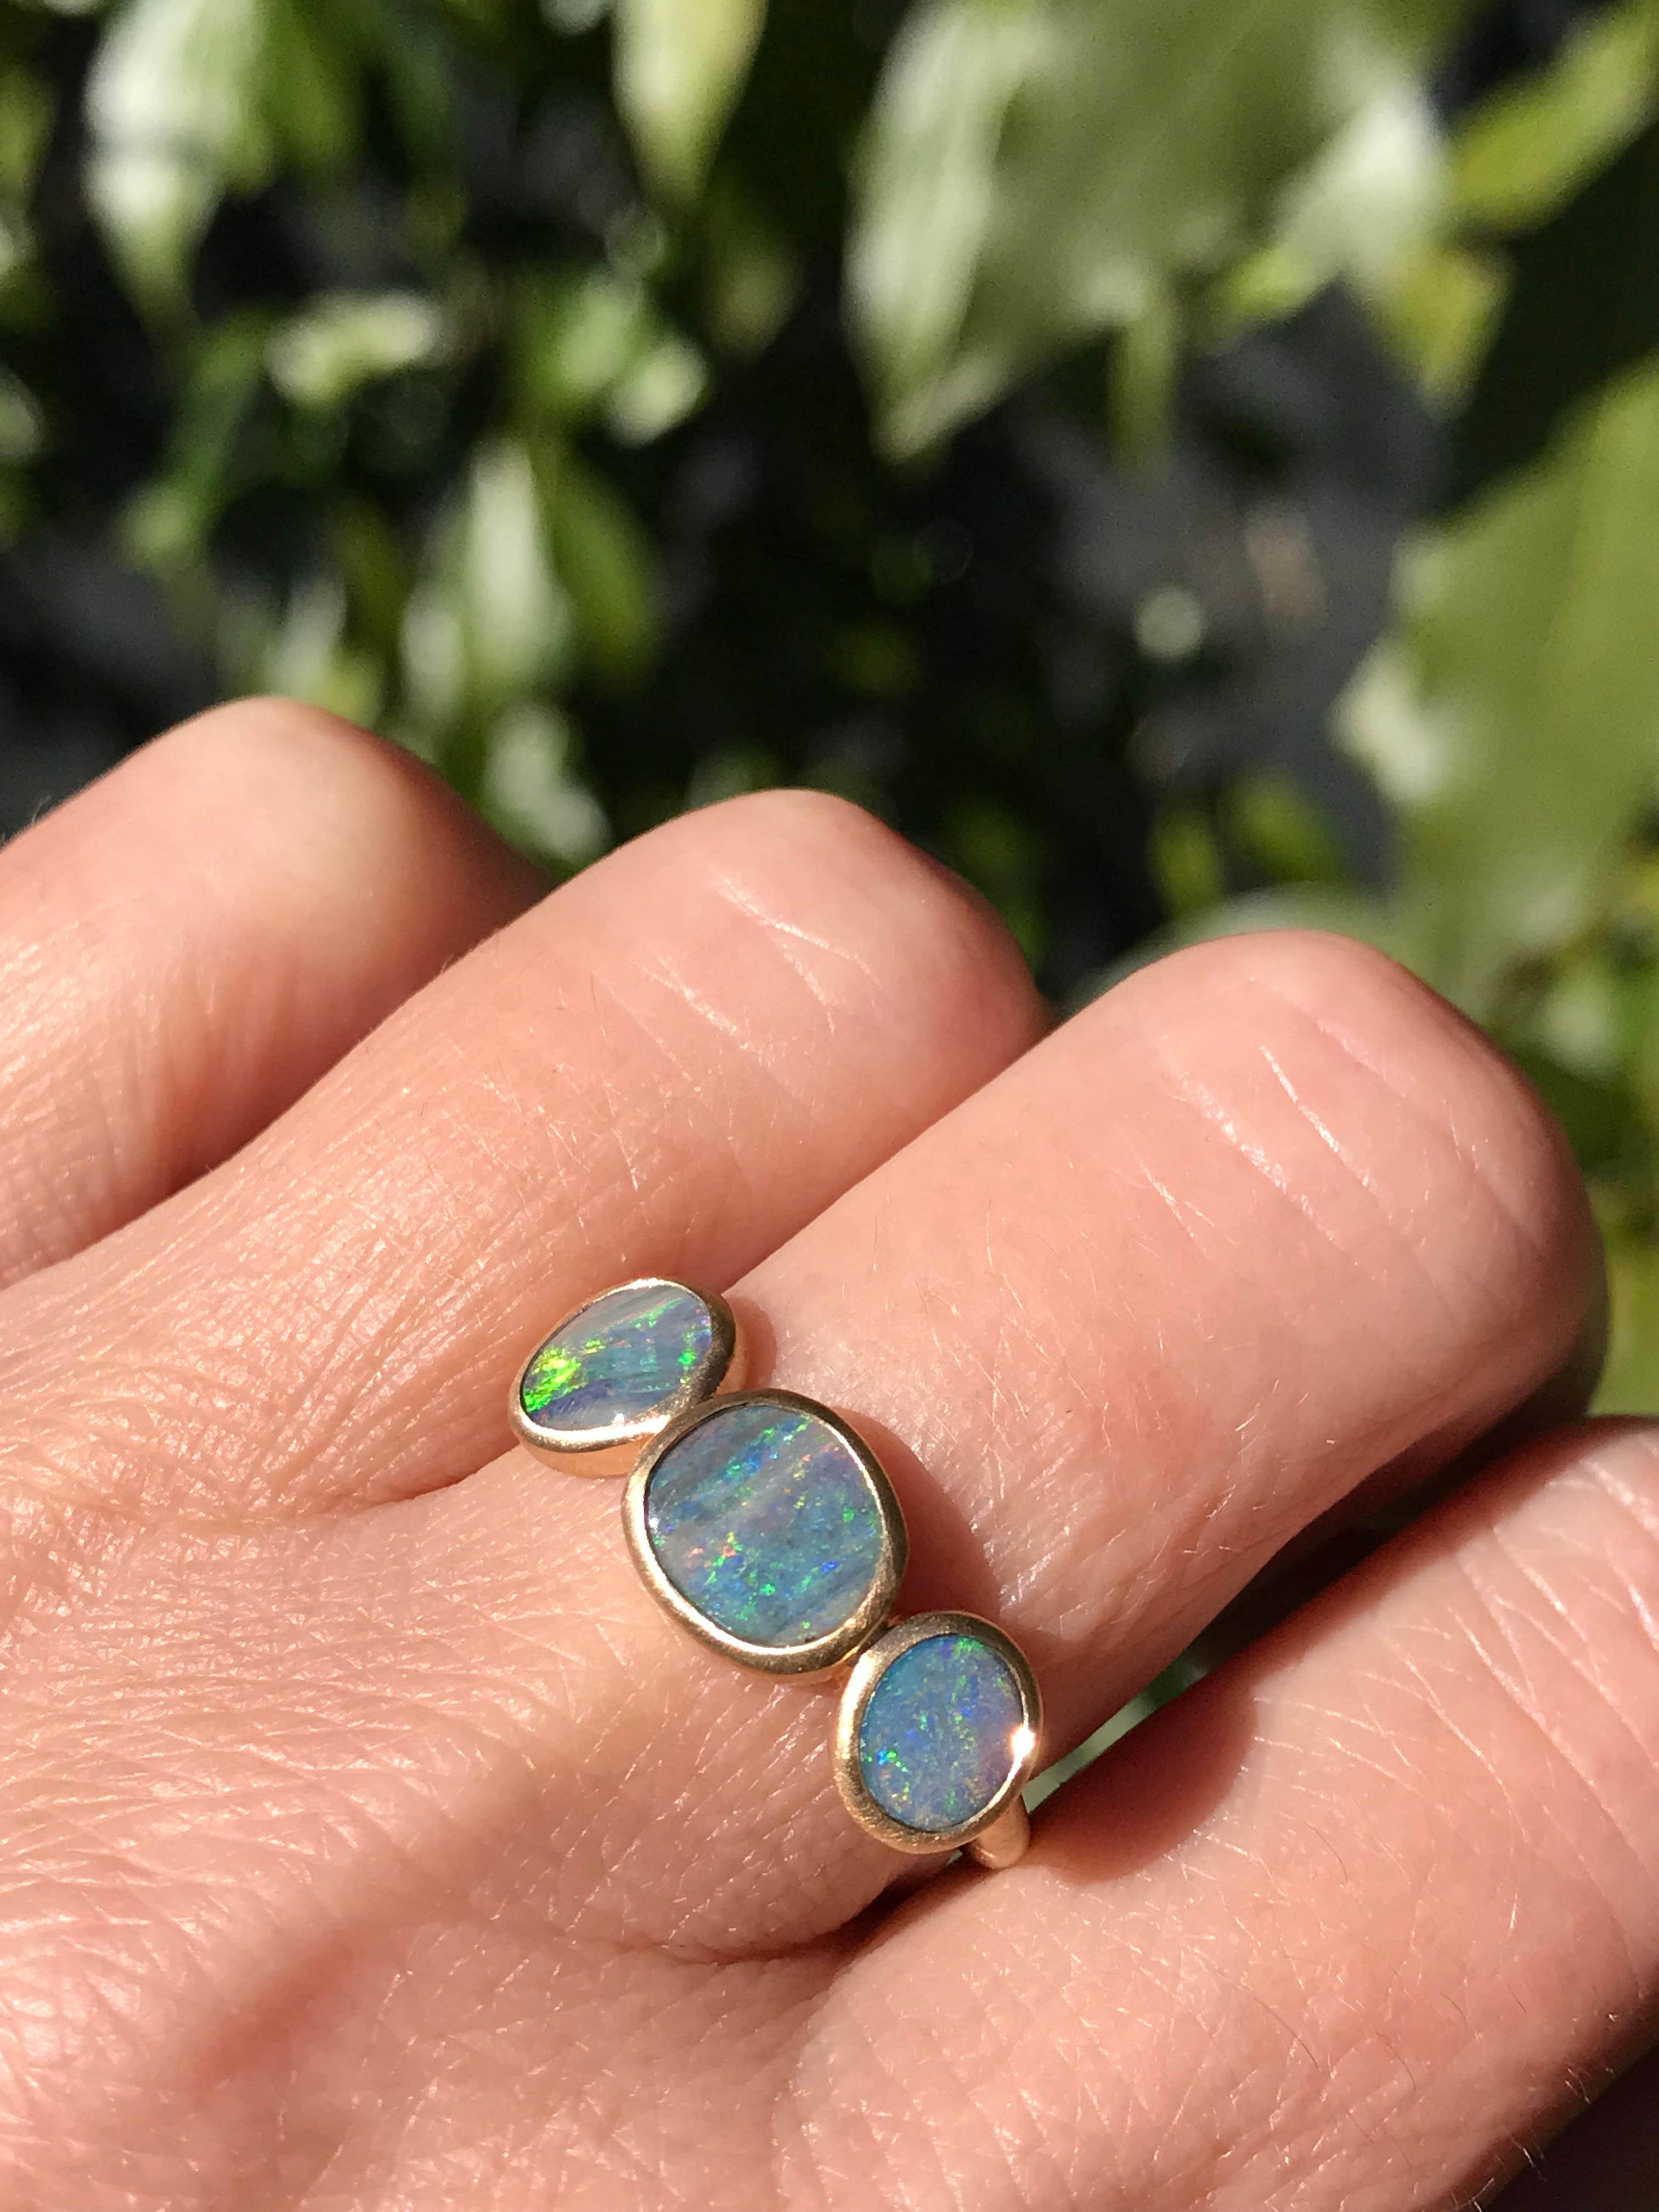 Dalben design One of a kind 18 kt yellow  gold ring with three bezel-set blue-violet-green Australian Boulder Opals weight 2,68 carats  .  
Ring size  US 7 1/4  - EU 55 re-sizable .  
Bezels setting dimension:  
max width 20,2 mm,  
max height 8,9